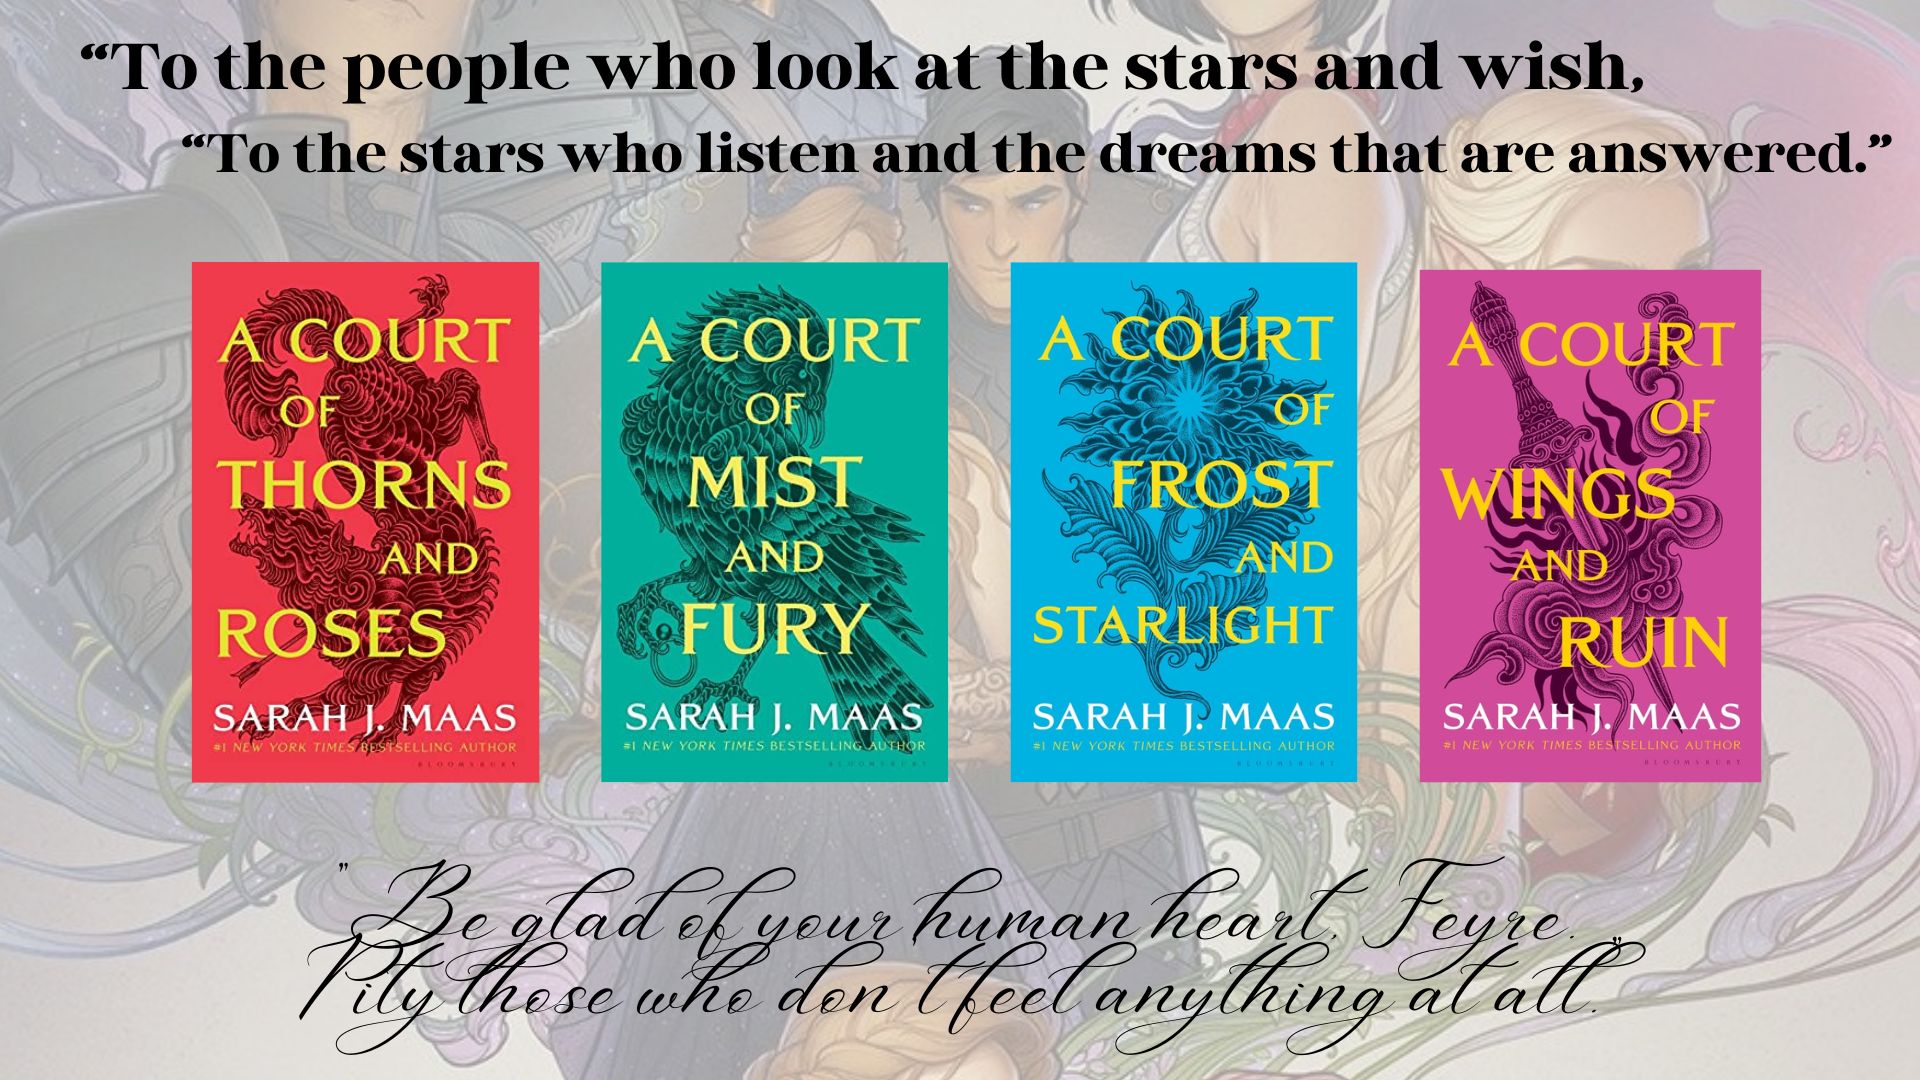 How To Read A Court Of Thorns And Roses ACOTAR Books In Order